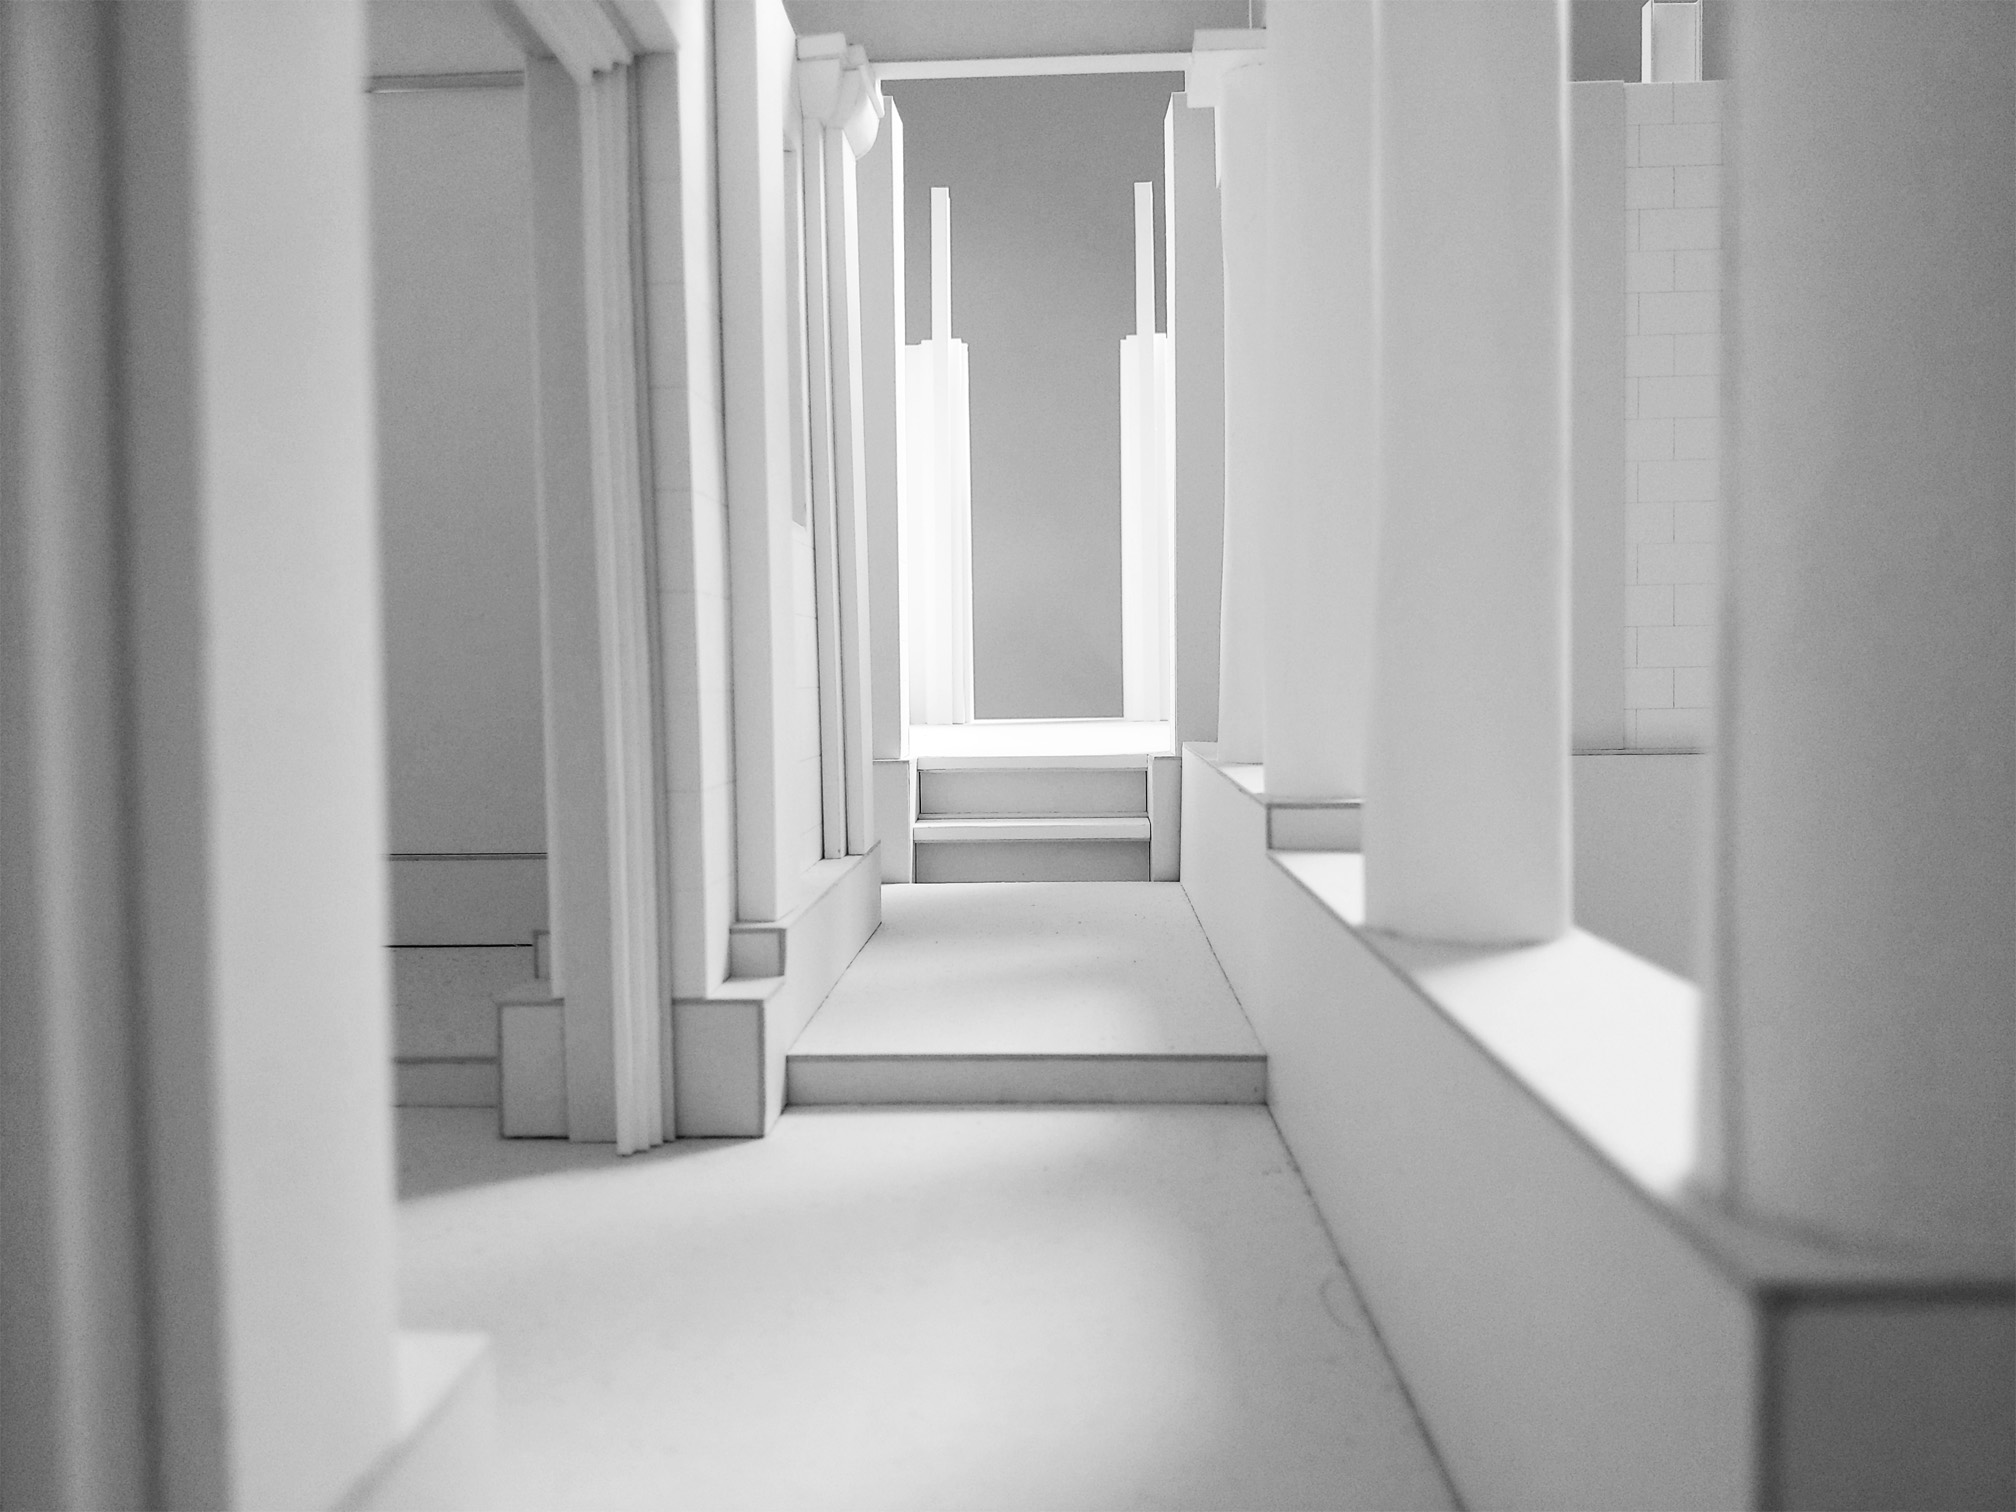 Photo of scale model, The Inbetween Space, scale 1:10, paper and cardboard